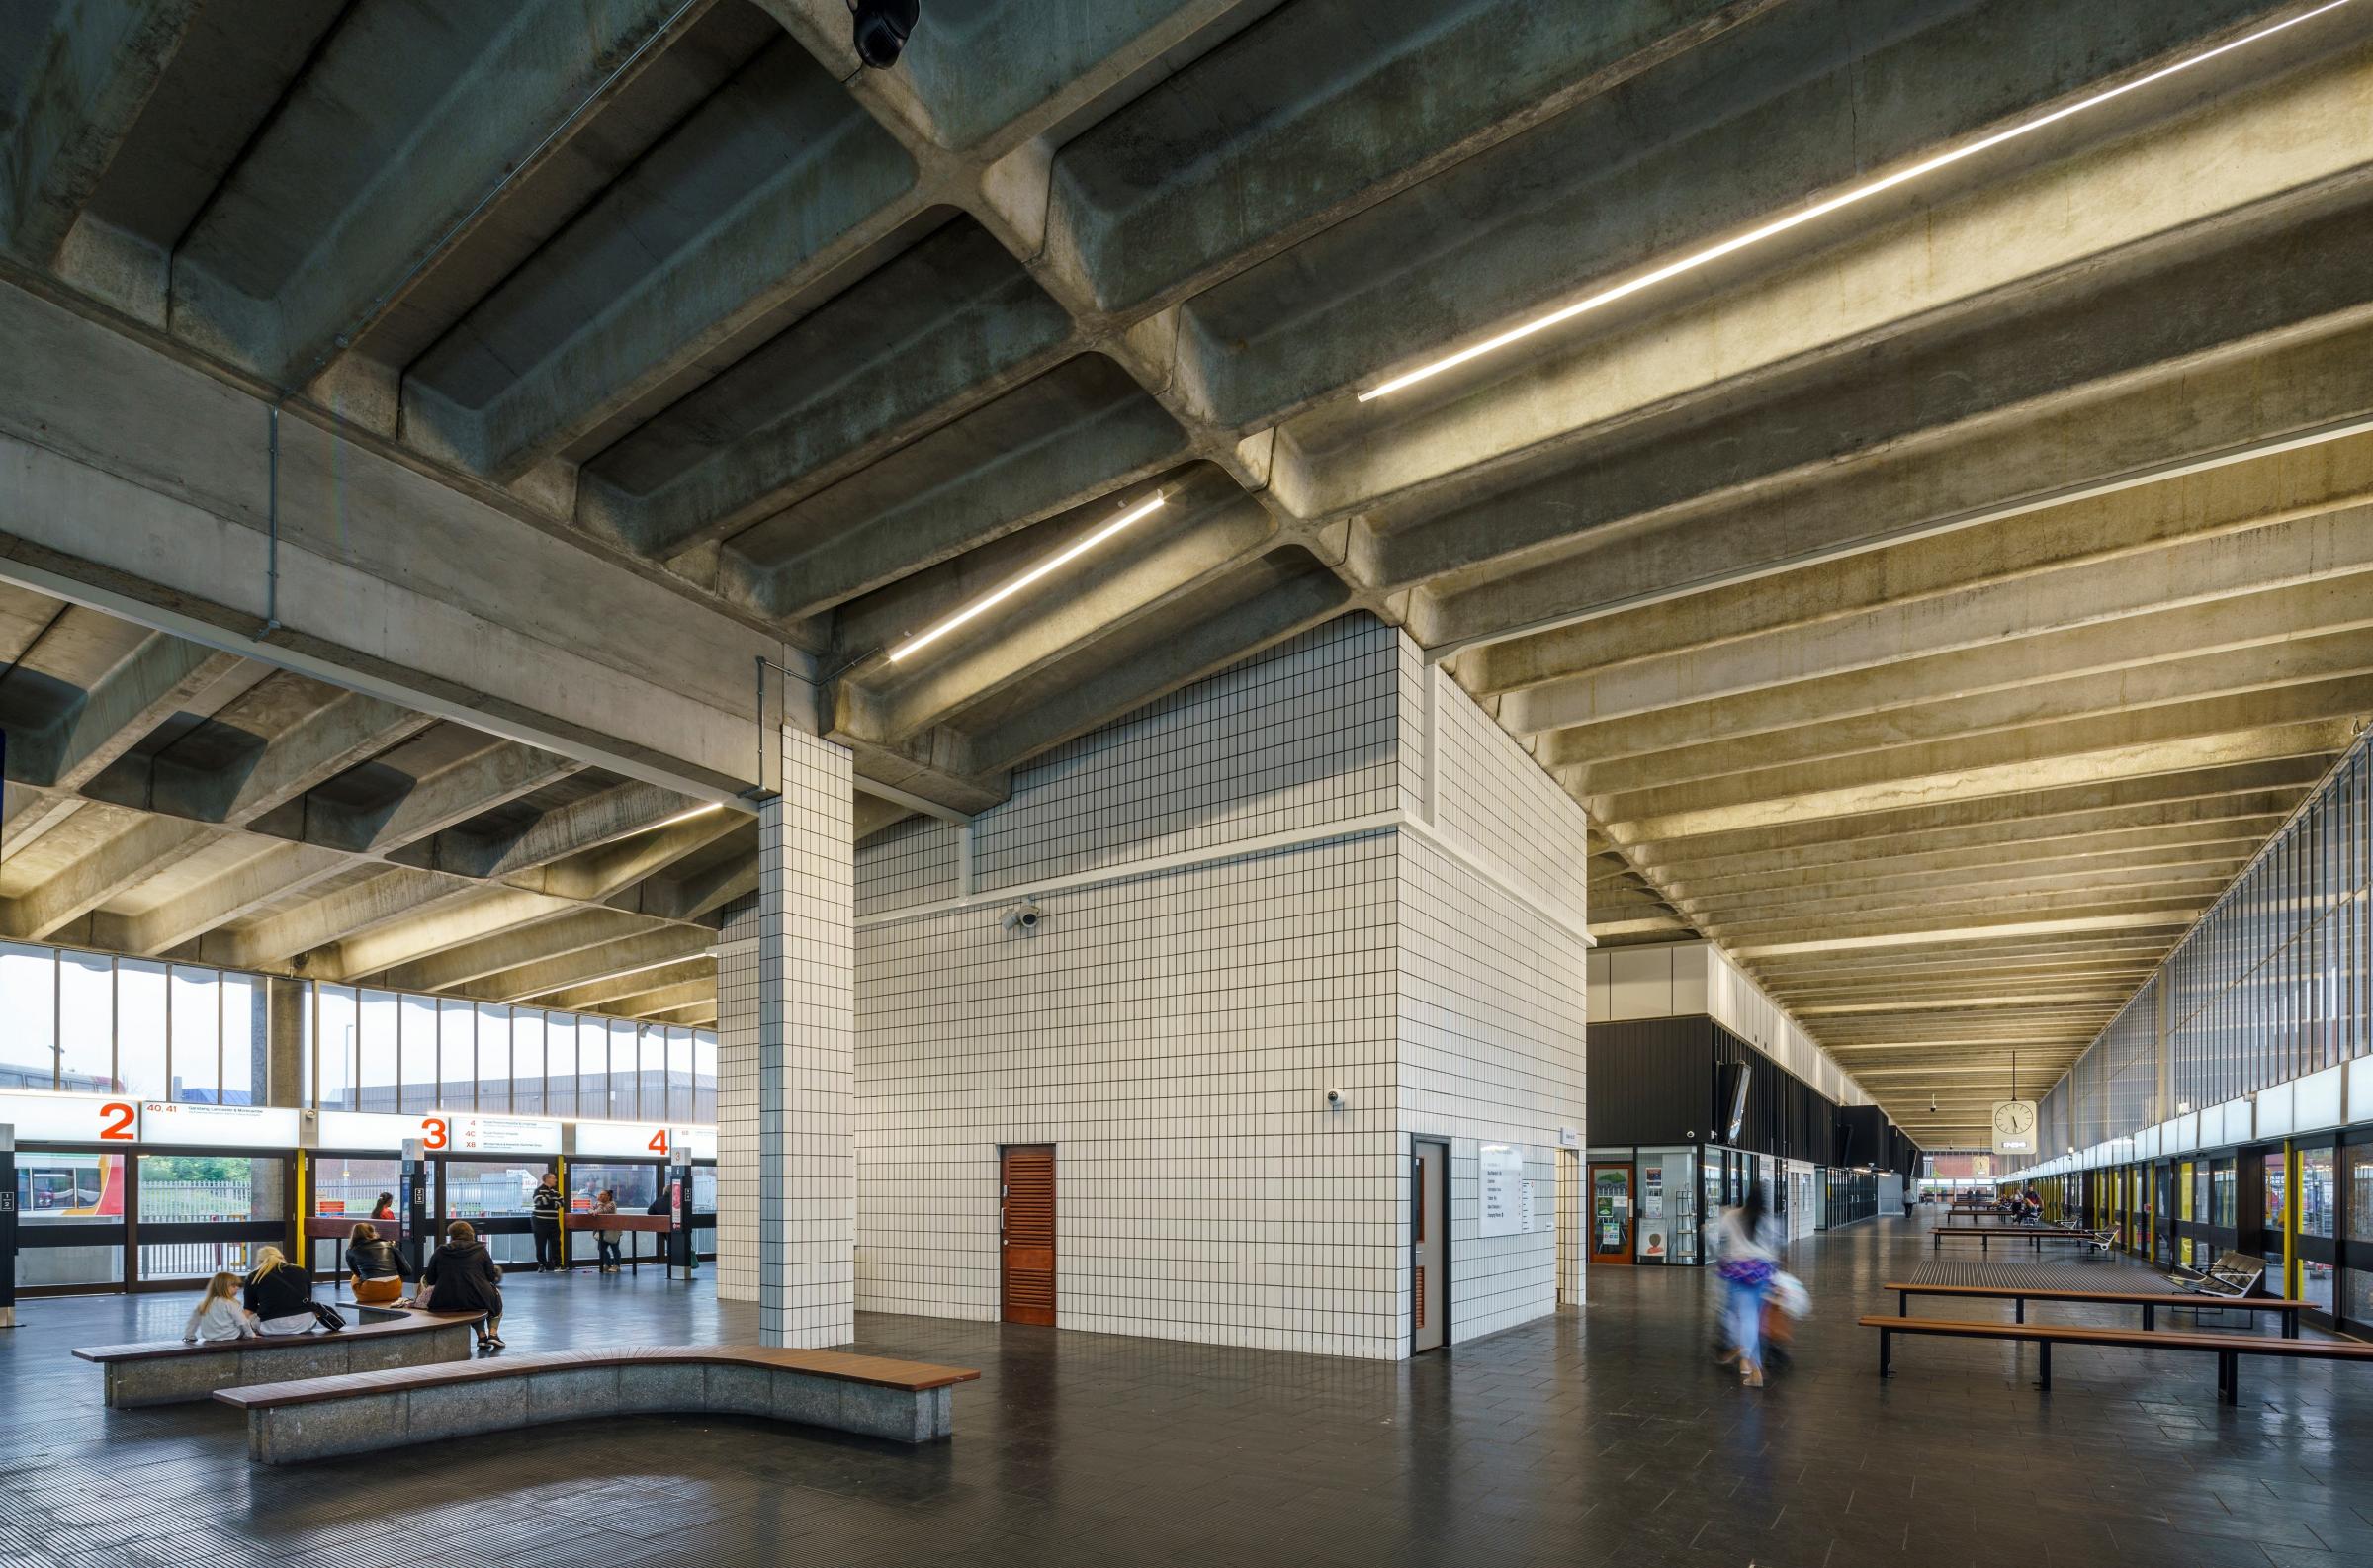 Preston bus station and Westminster Abbey tower up for Stirling Prize